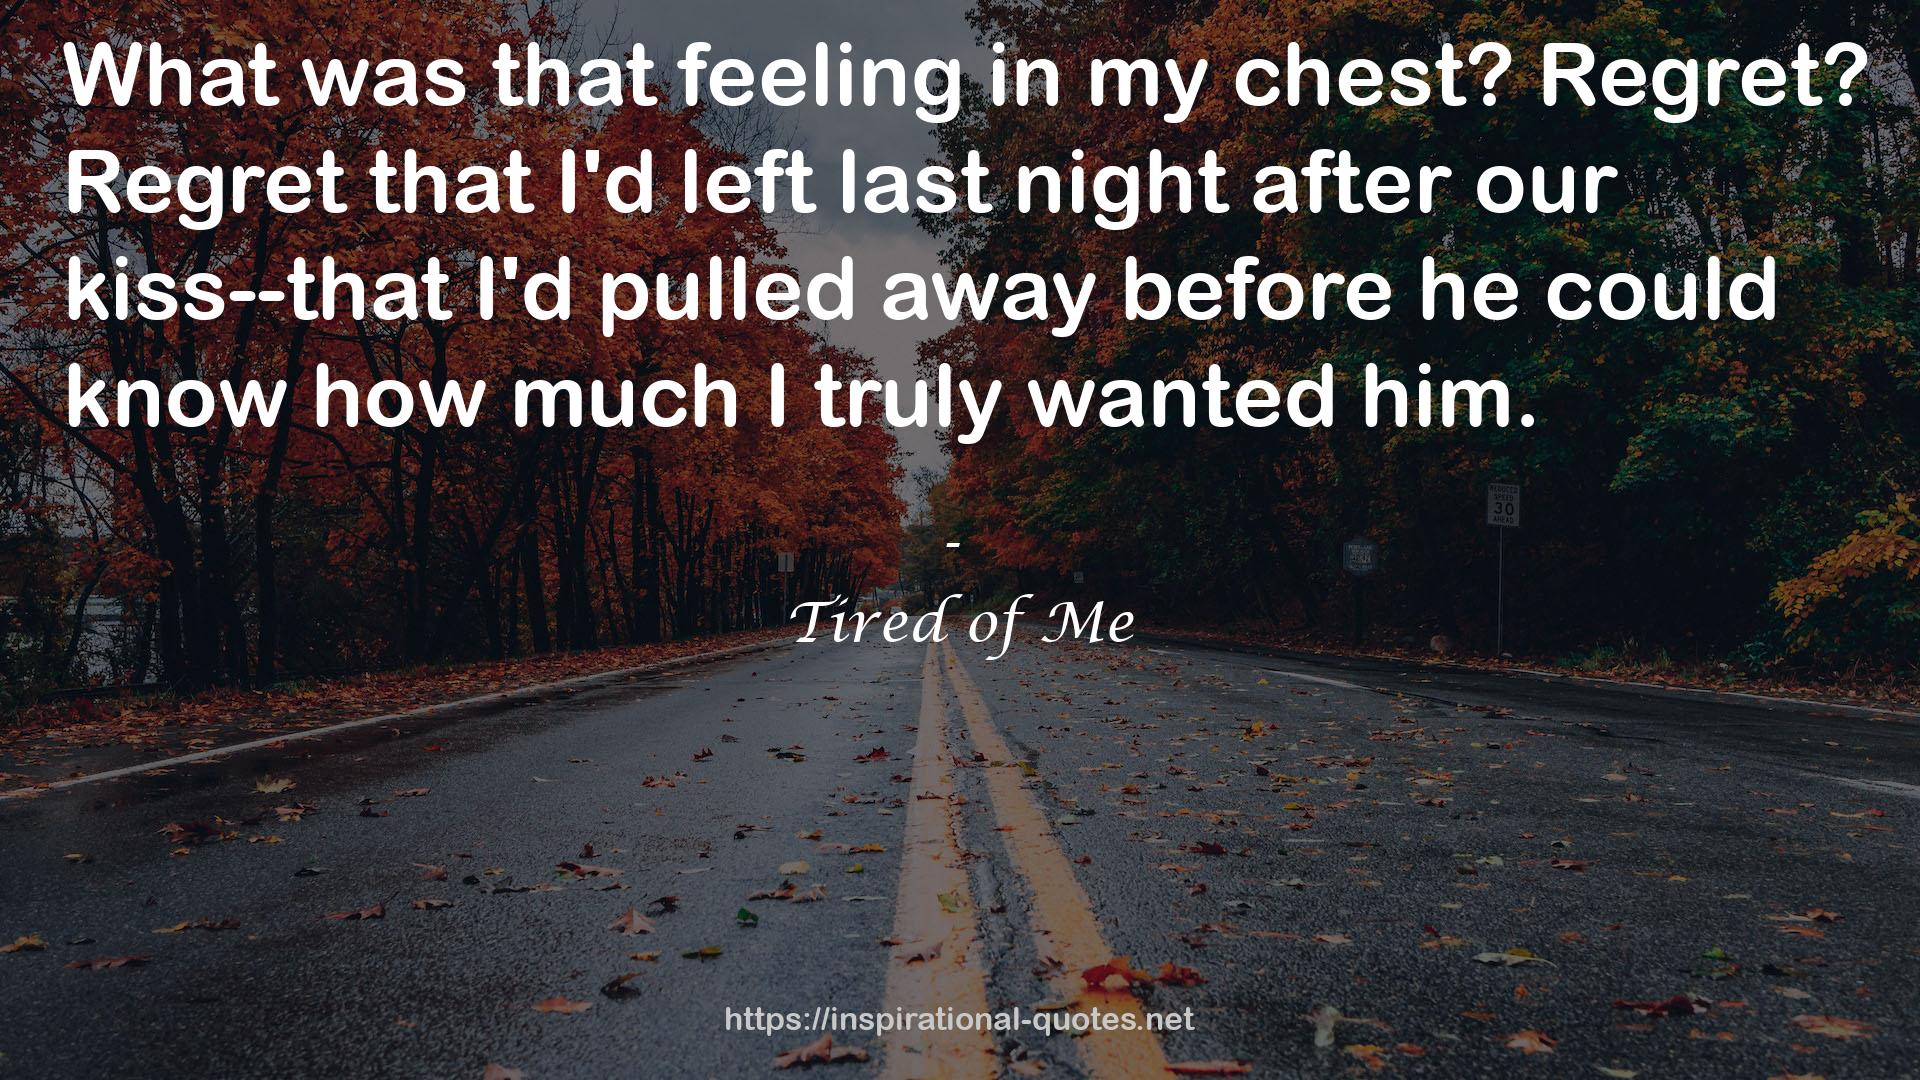 Tired of Me QUOTES